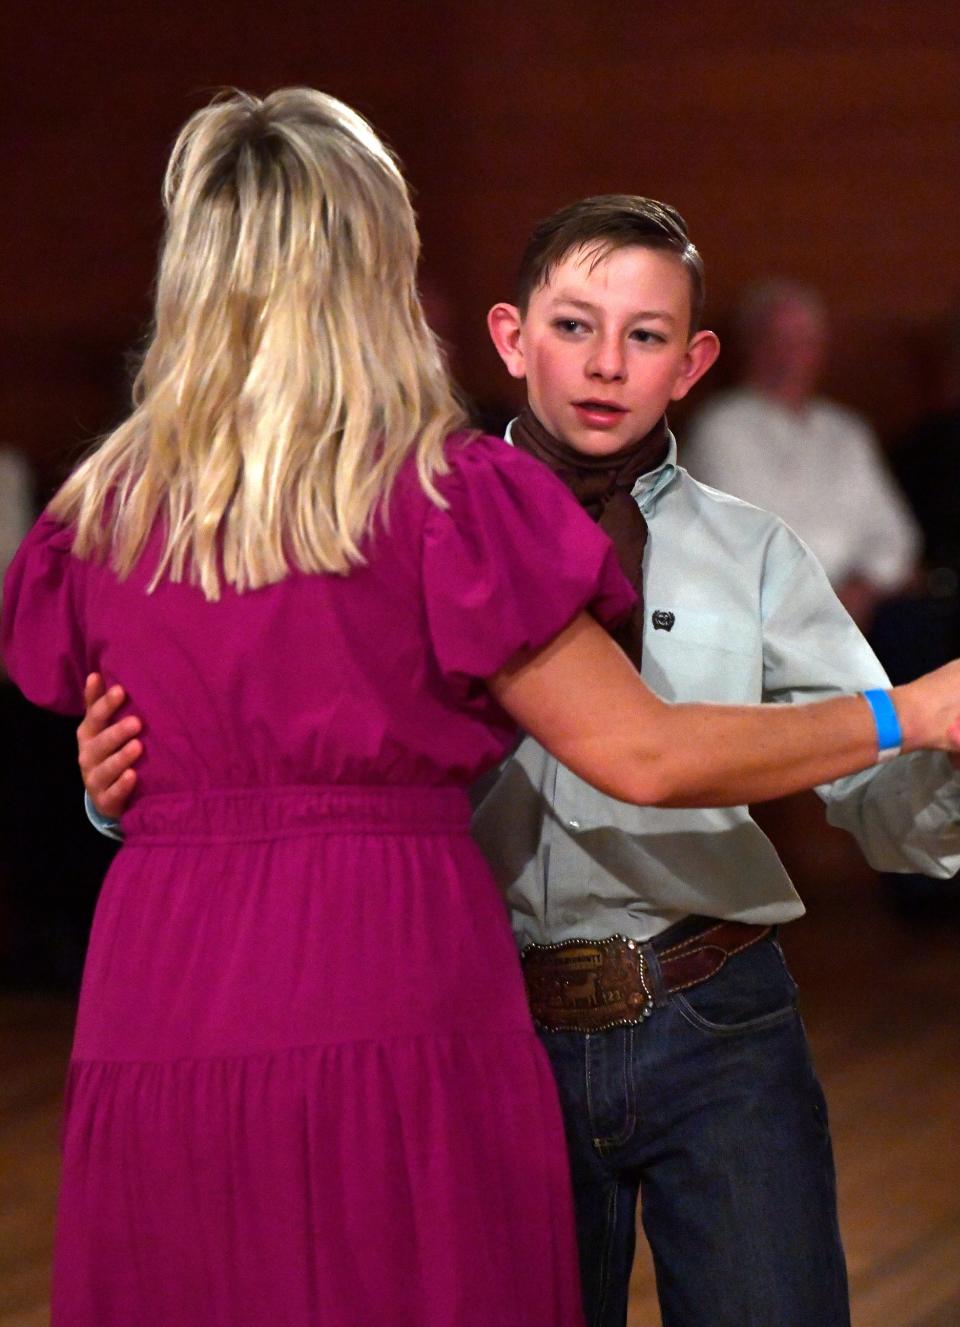 Hagen Hudson, 13, dances with his mother, Lindsay, during the Texas Cowboys’ Christmas Ball. The Hudson family traveled from Pampa to partake in the annual holiday tradition.